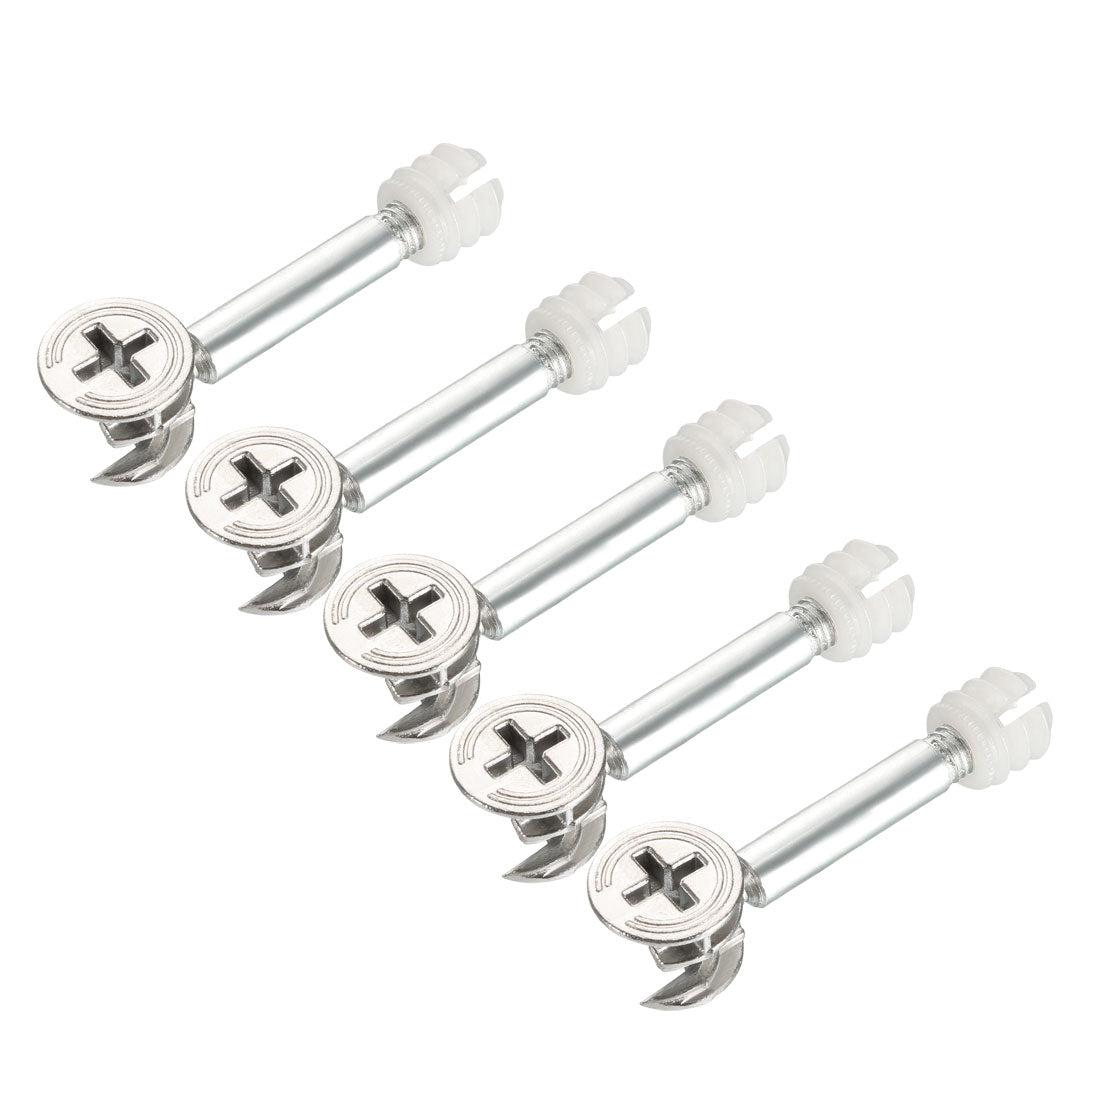 uxcell Uxcell 5 Sets Furniture Connecting 15mm OD Cam Fitting with Dowel Nut Assembly